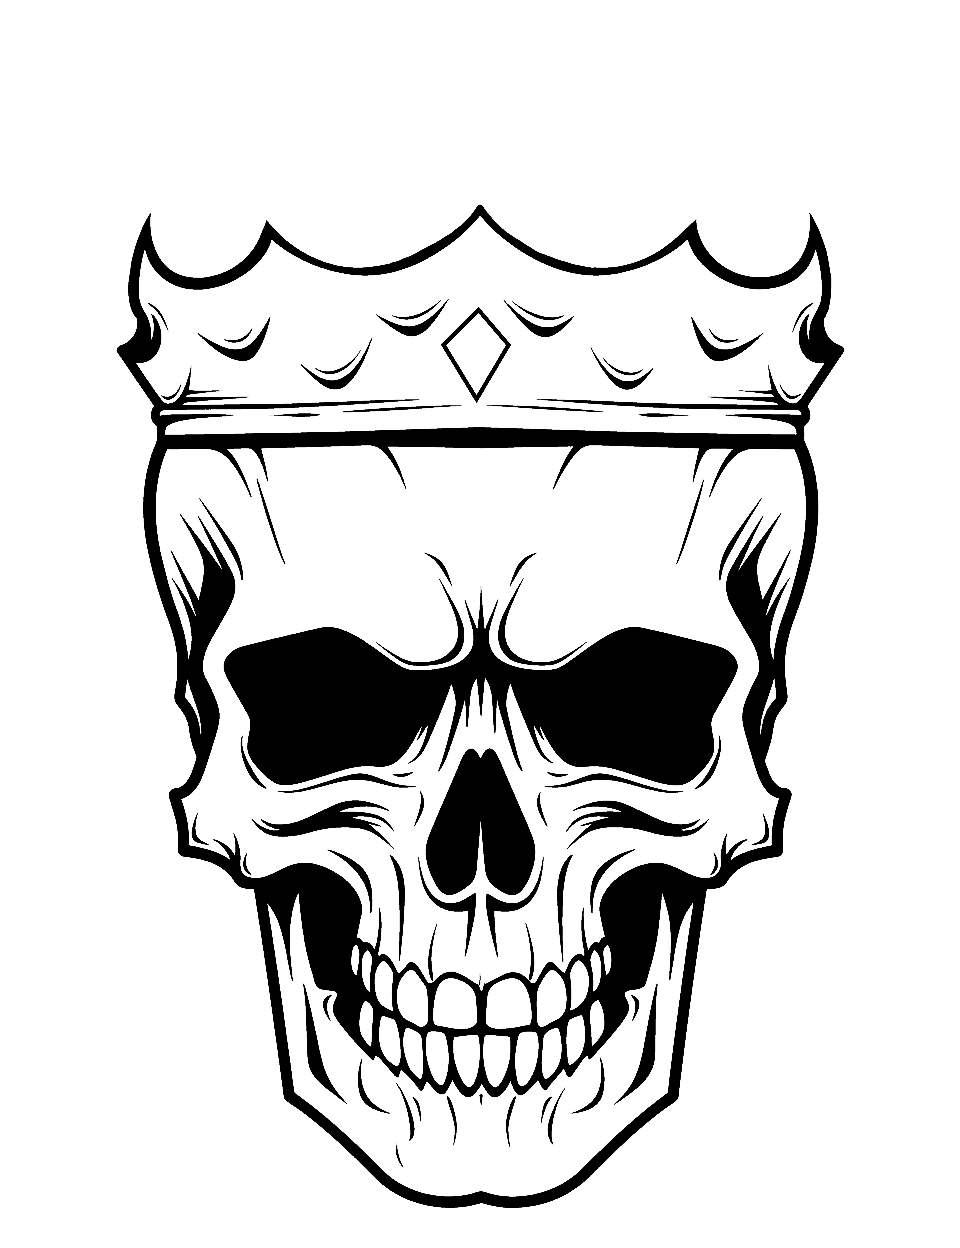 Royal Crown Skull Coloring Page - A skull adorned with a majestic crown, signifying royalty.